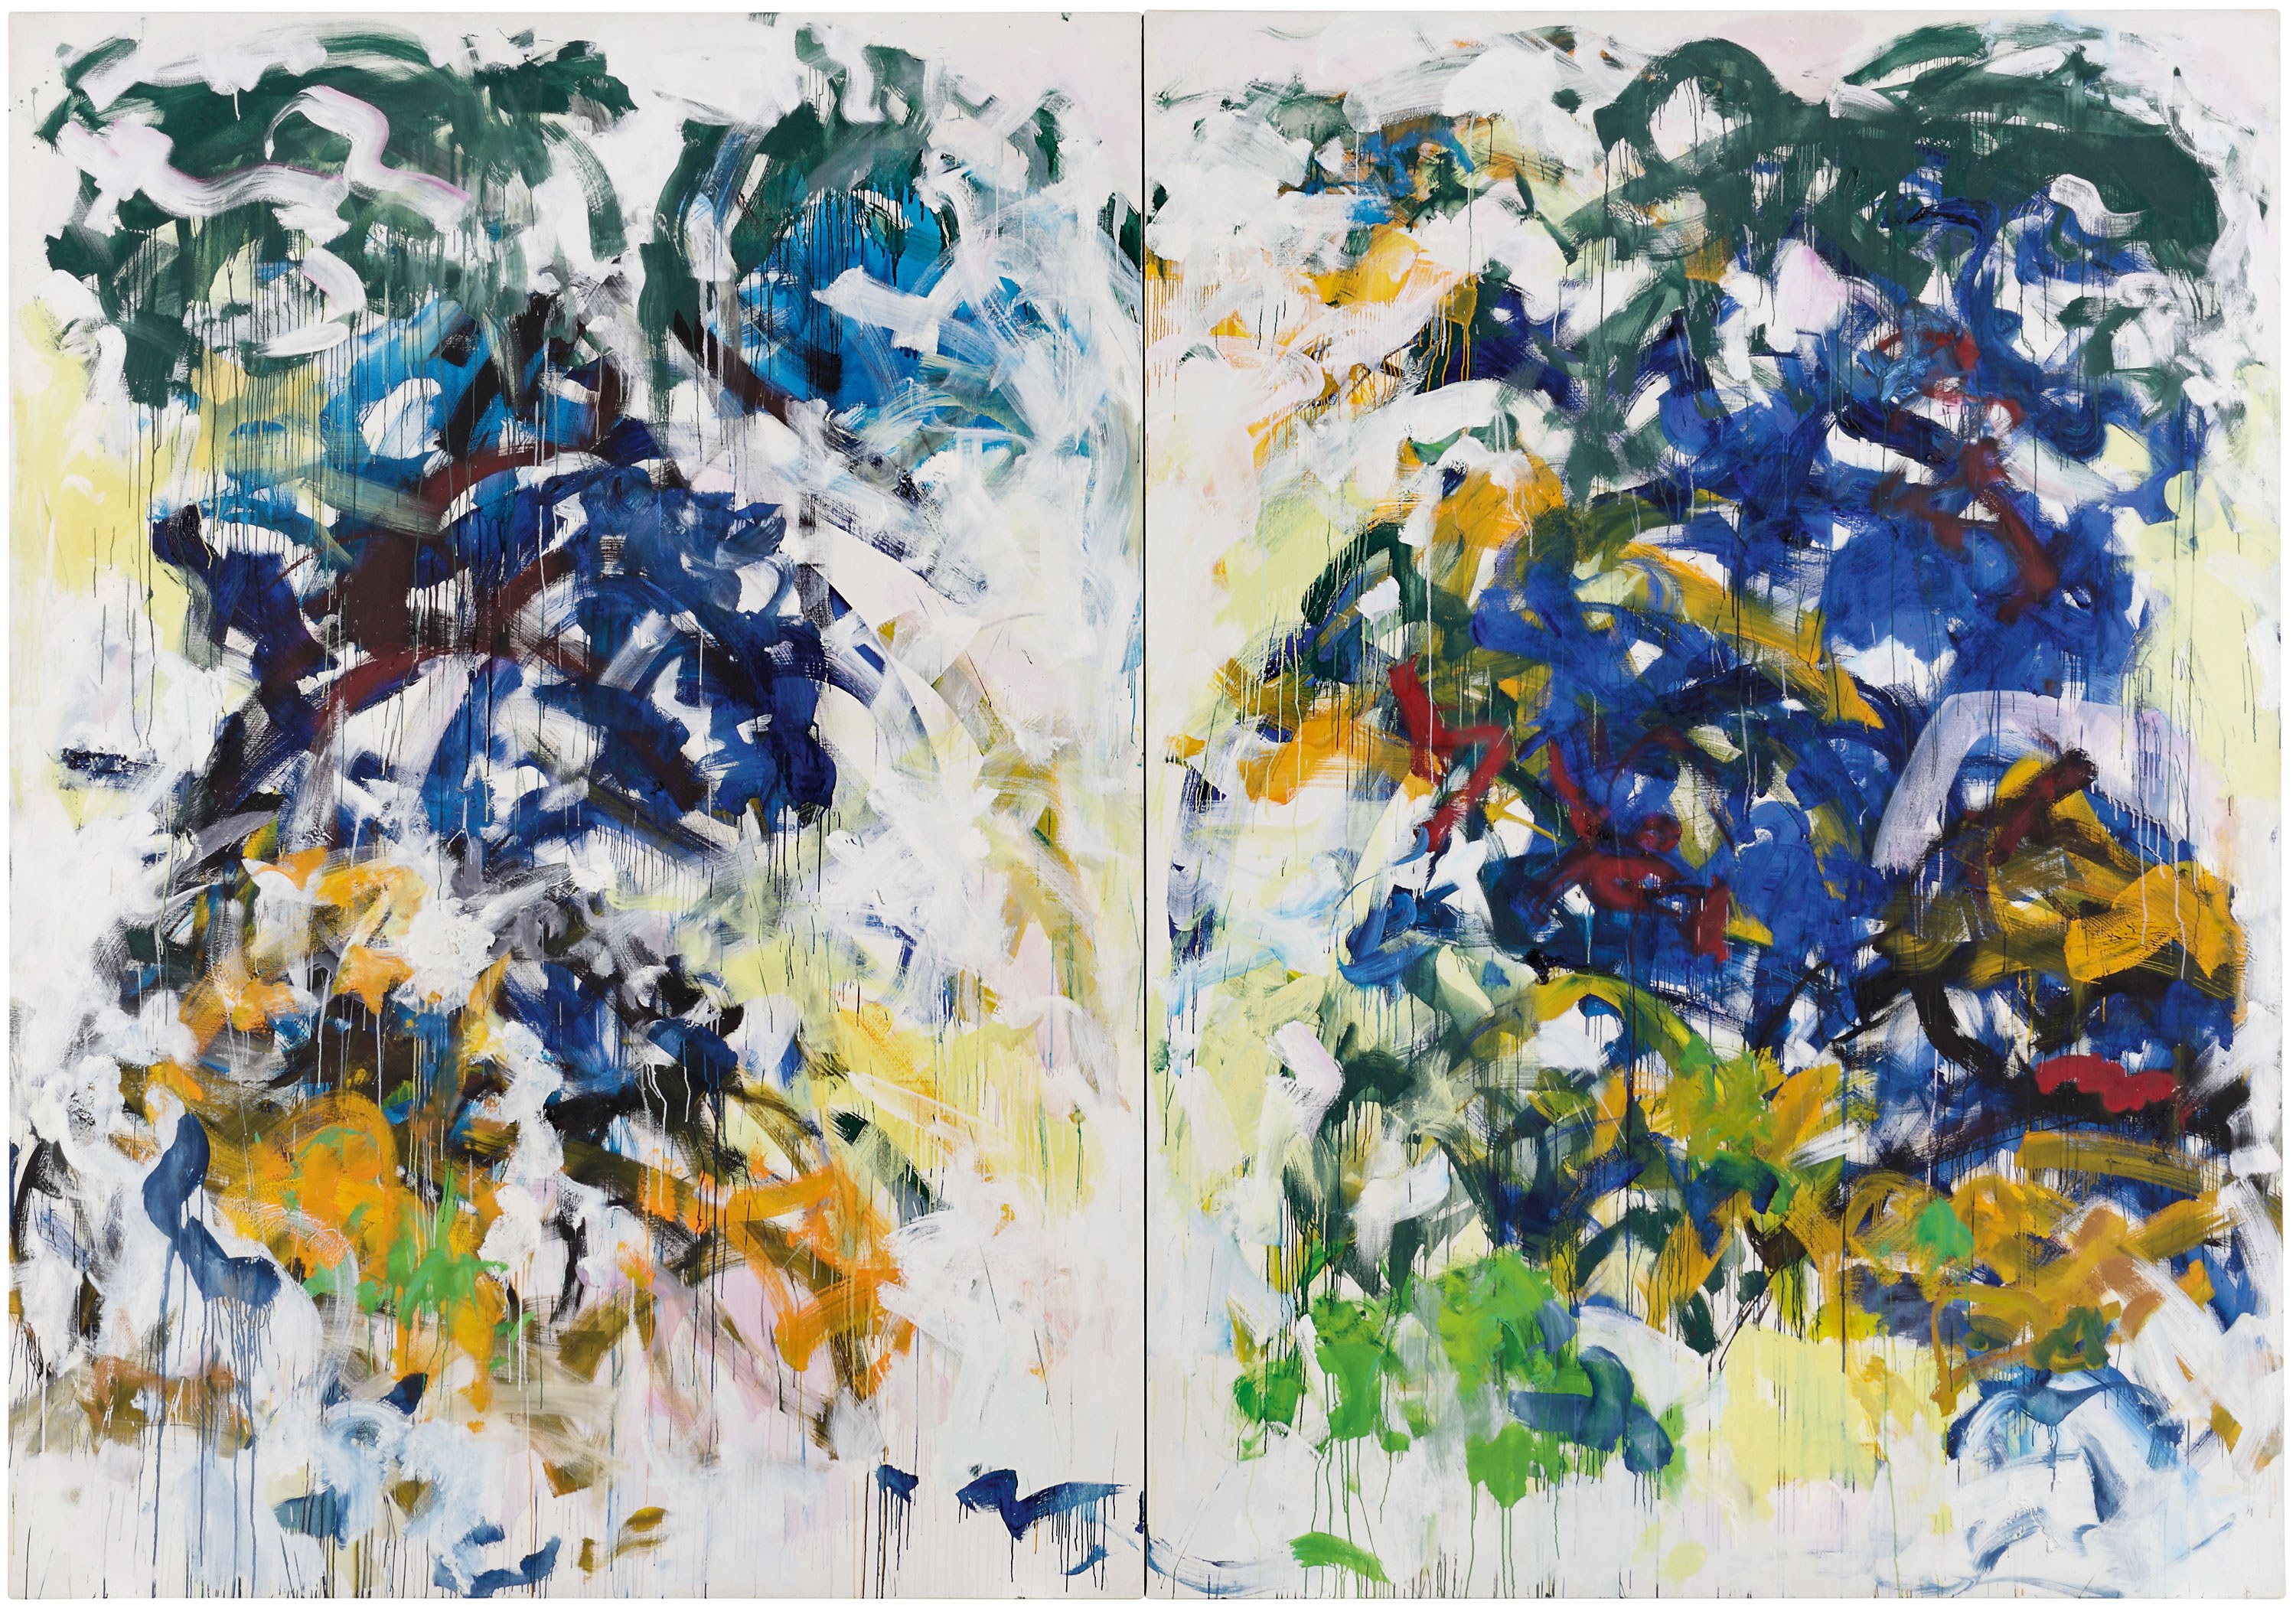 The Joan Mitchell Foundation tells Louis Vuitton to stop using paintings in  ads for handbags